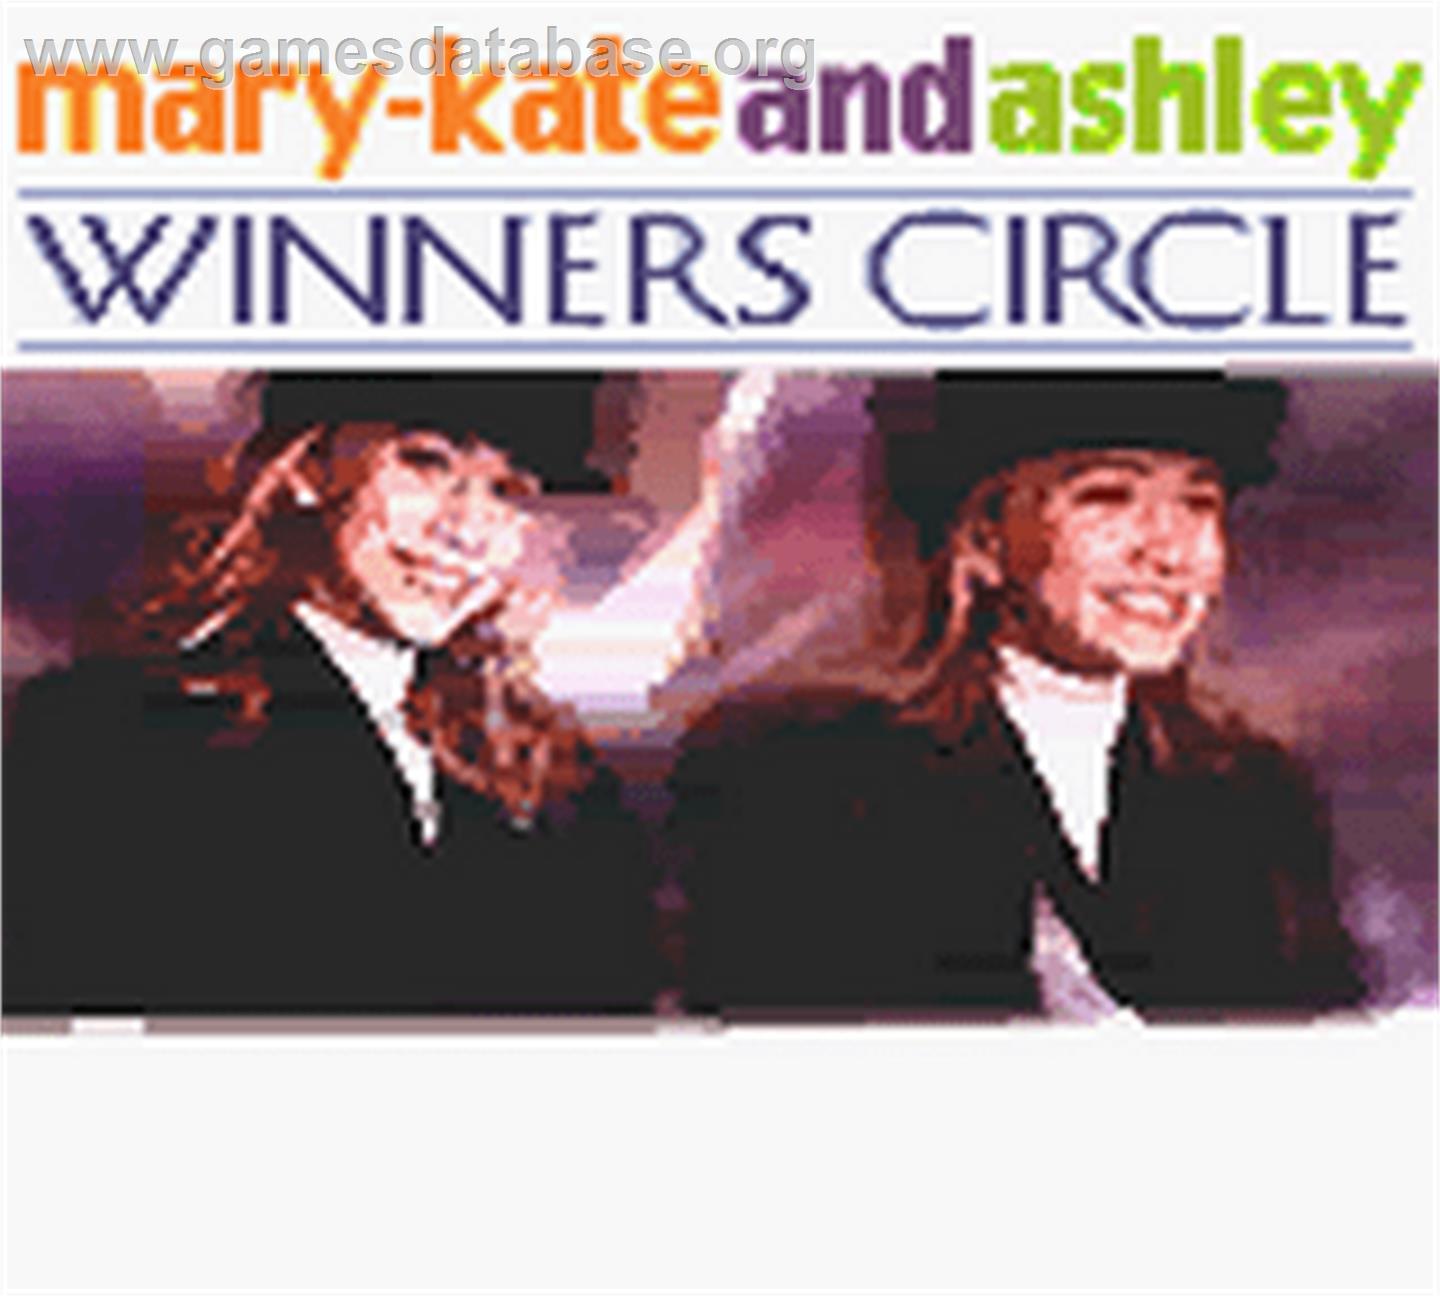 Mary-Kate and Ashley: Winner's Circle - Nintendo Game Boy Color - Artwork - Title Screen